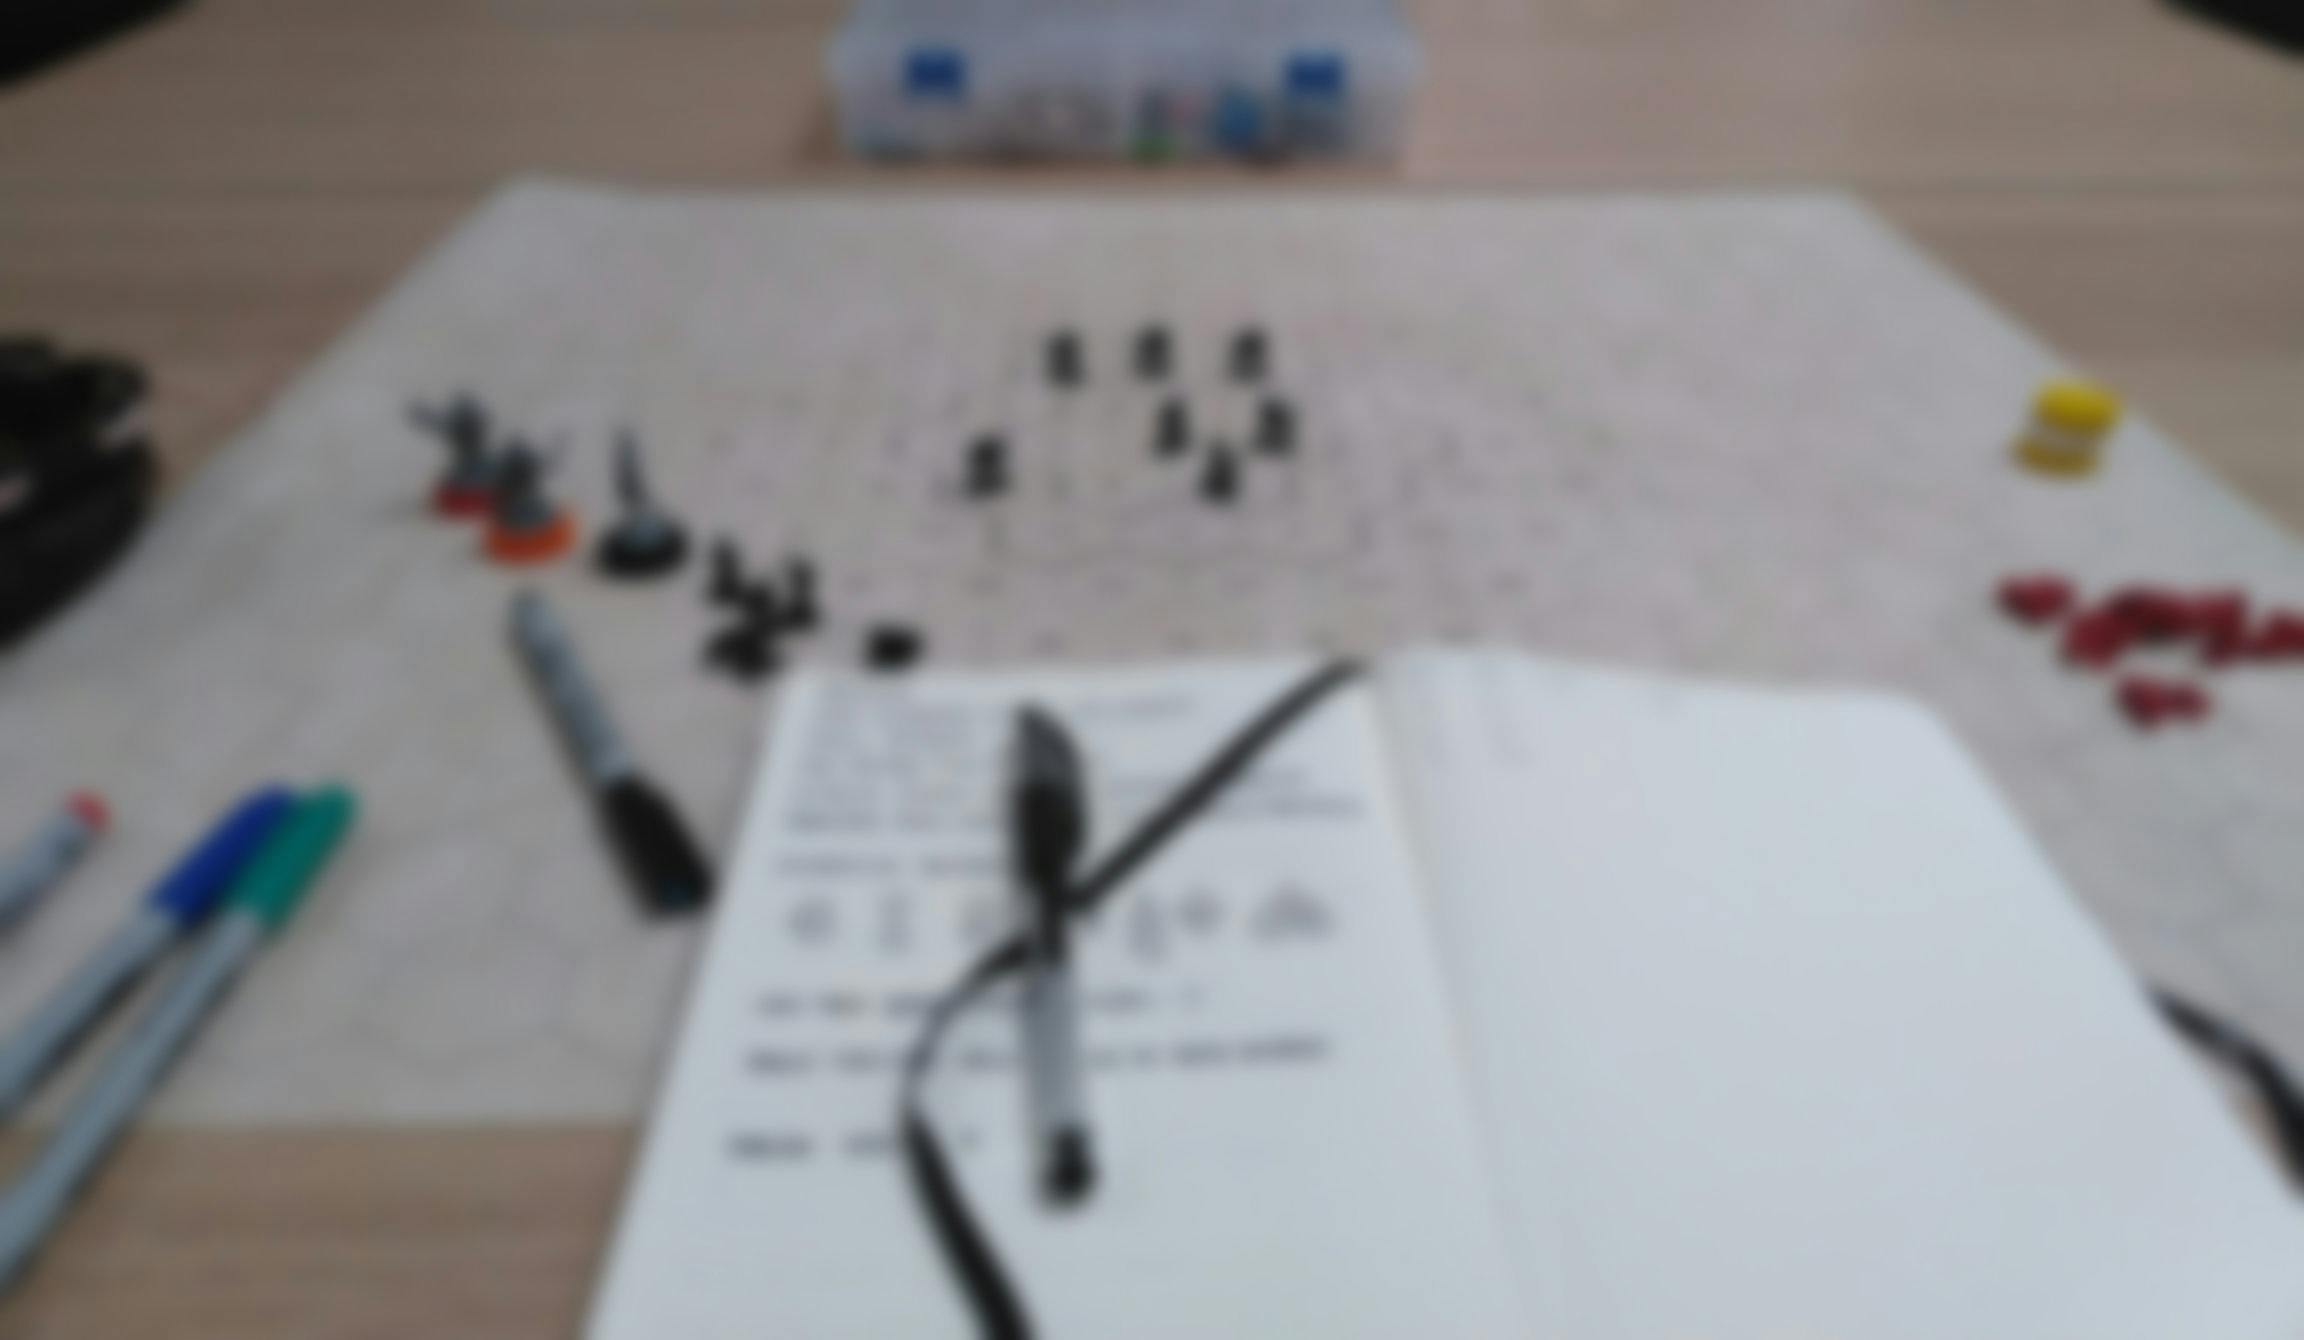 A blurred image of a notebook and boardgame pieces on graph paper